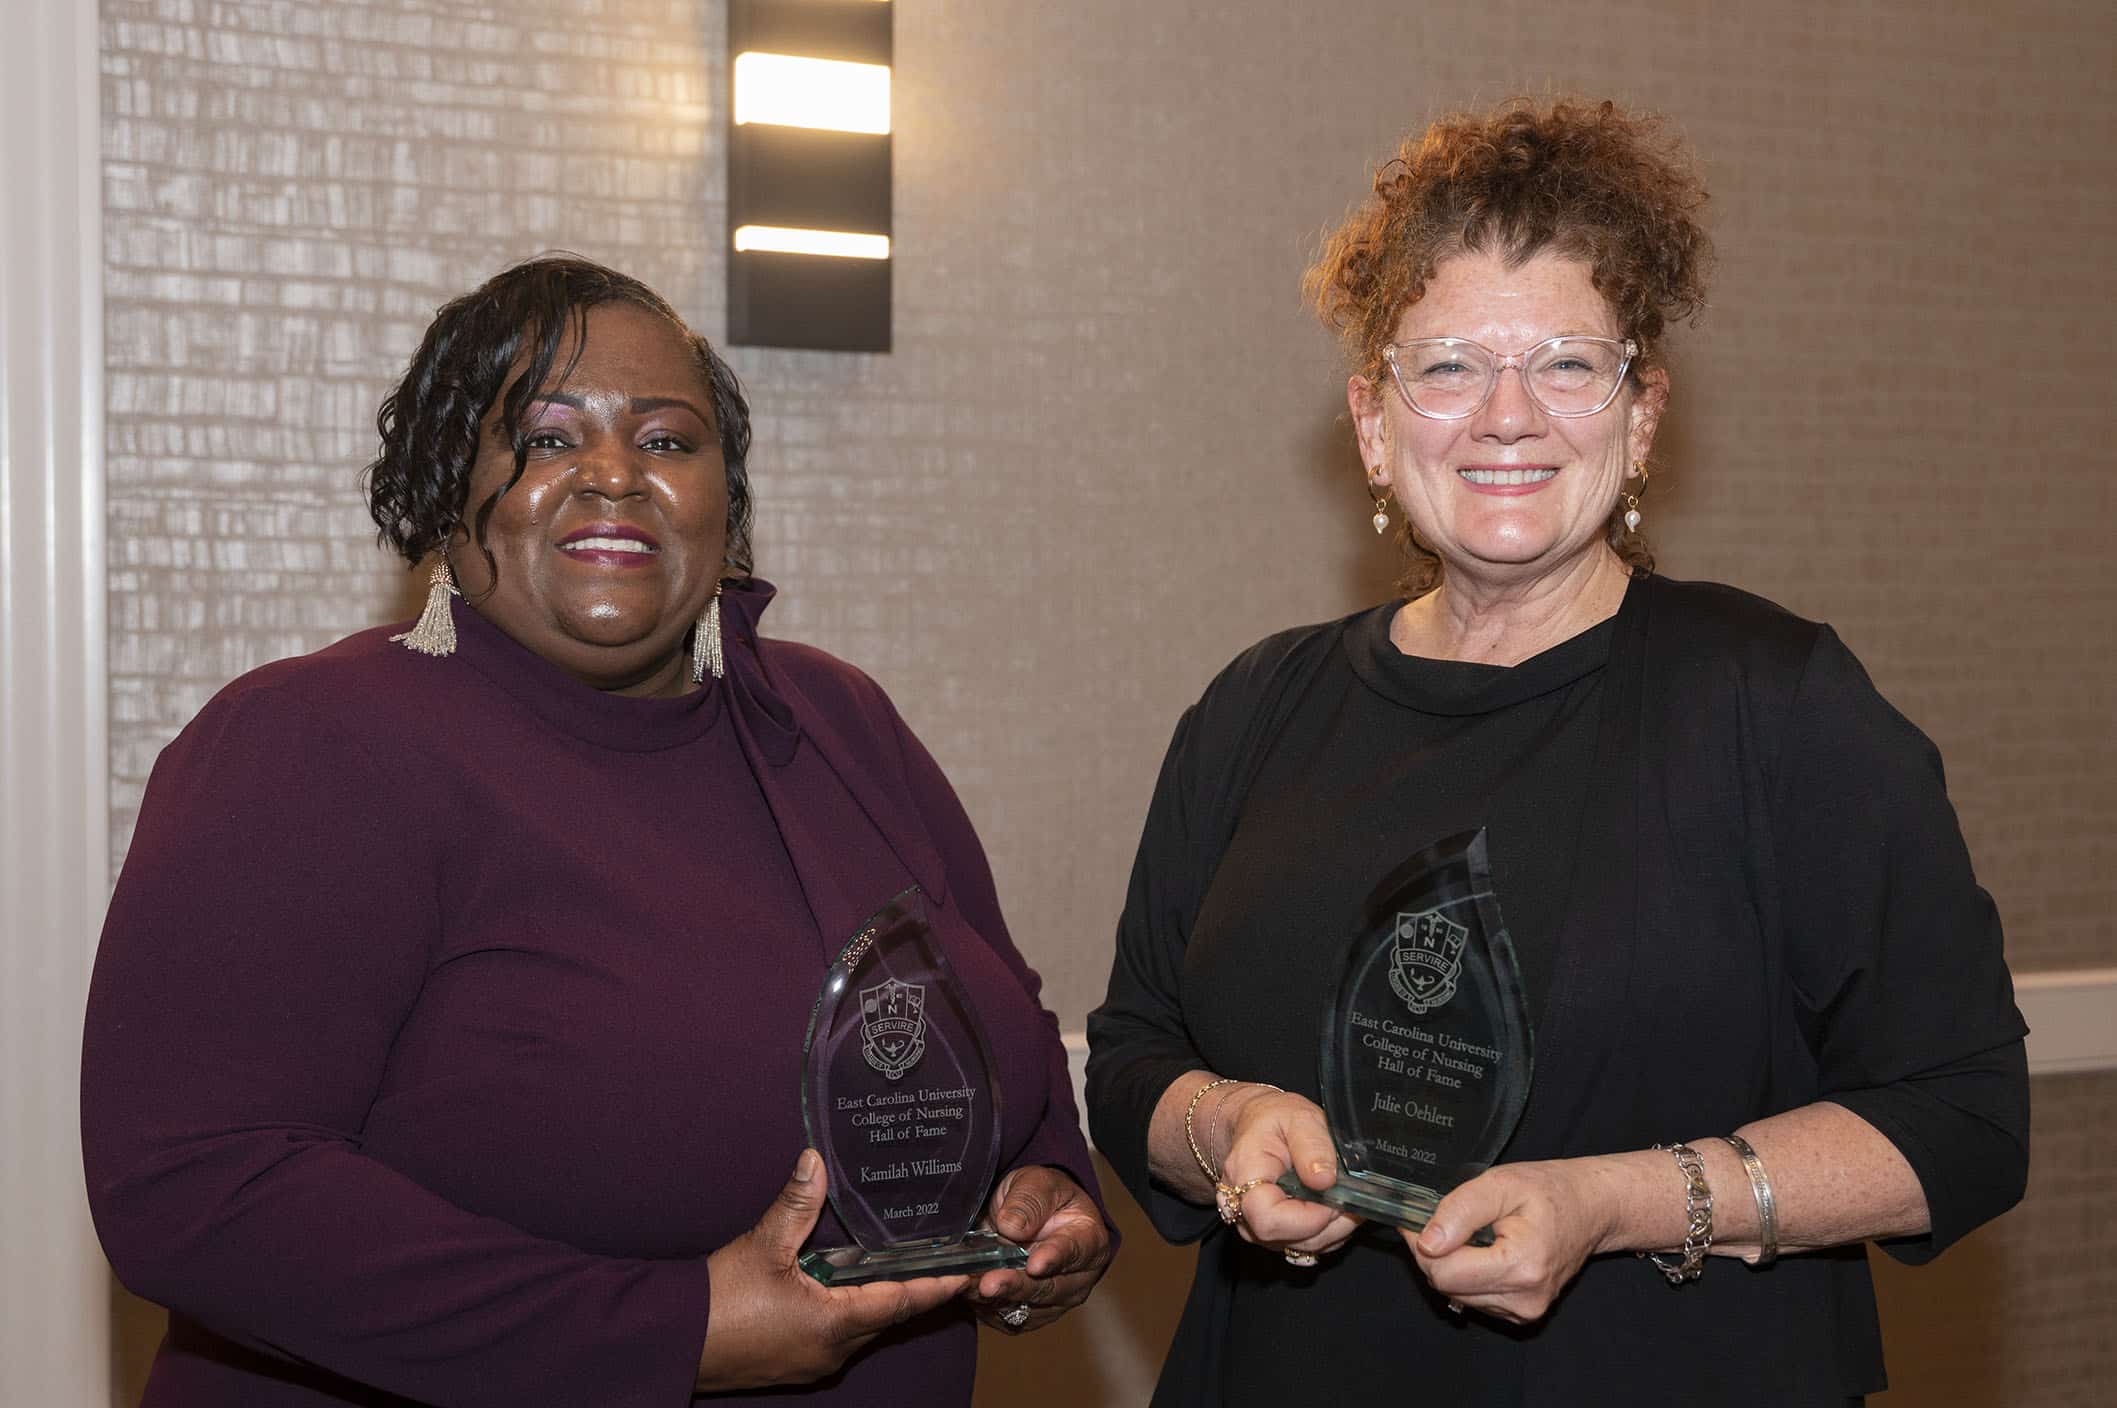 Dr. Julie Kennedy Oehlert and Dr. Kamilah Williams were inducted into the ECU College of Nursing Hall of Fame.